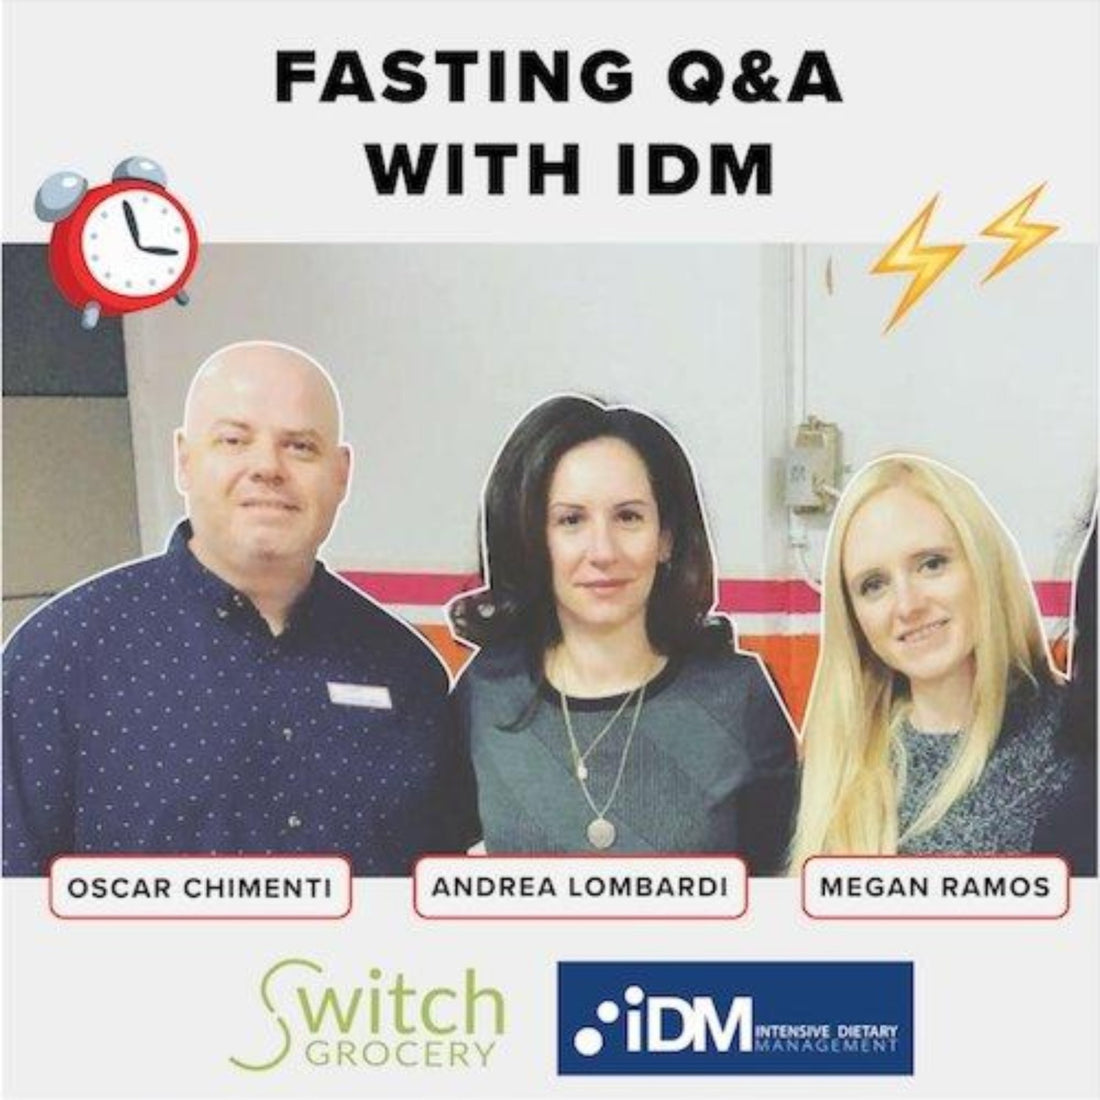 Fasting Q&A with IDM on SwitchGrocery Canada